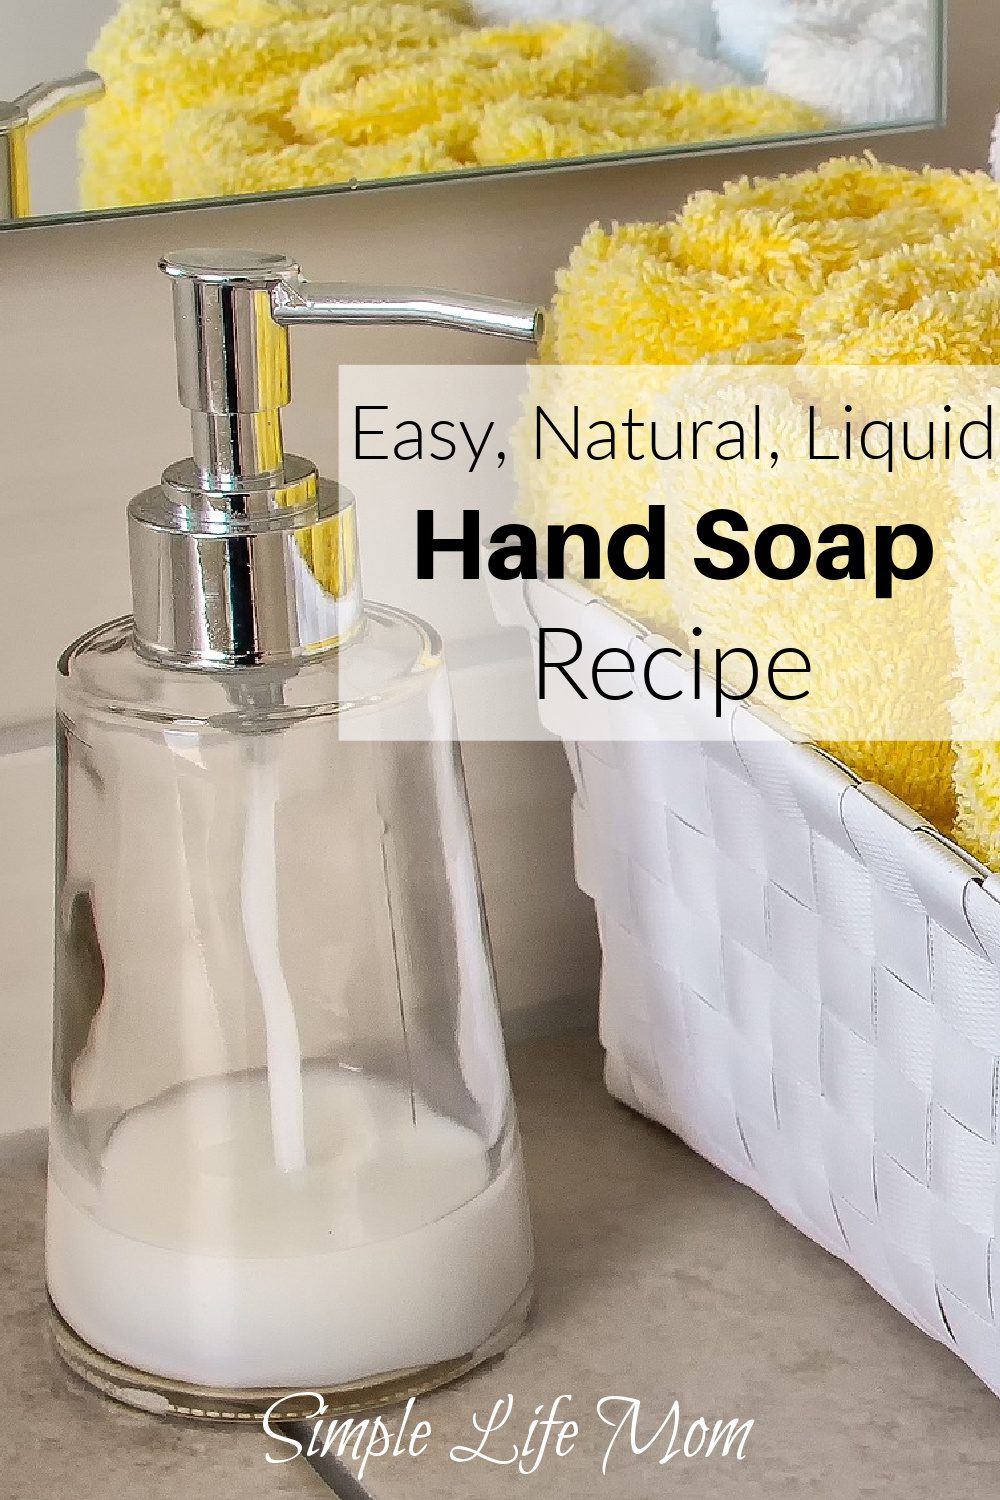 https://simplelifemom.com/wp-content/uploads/2023/02/Easy-and-Natural-Liquid-Hand-Soap-Recipe-from-Simple-Life-Mom.jpg